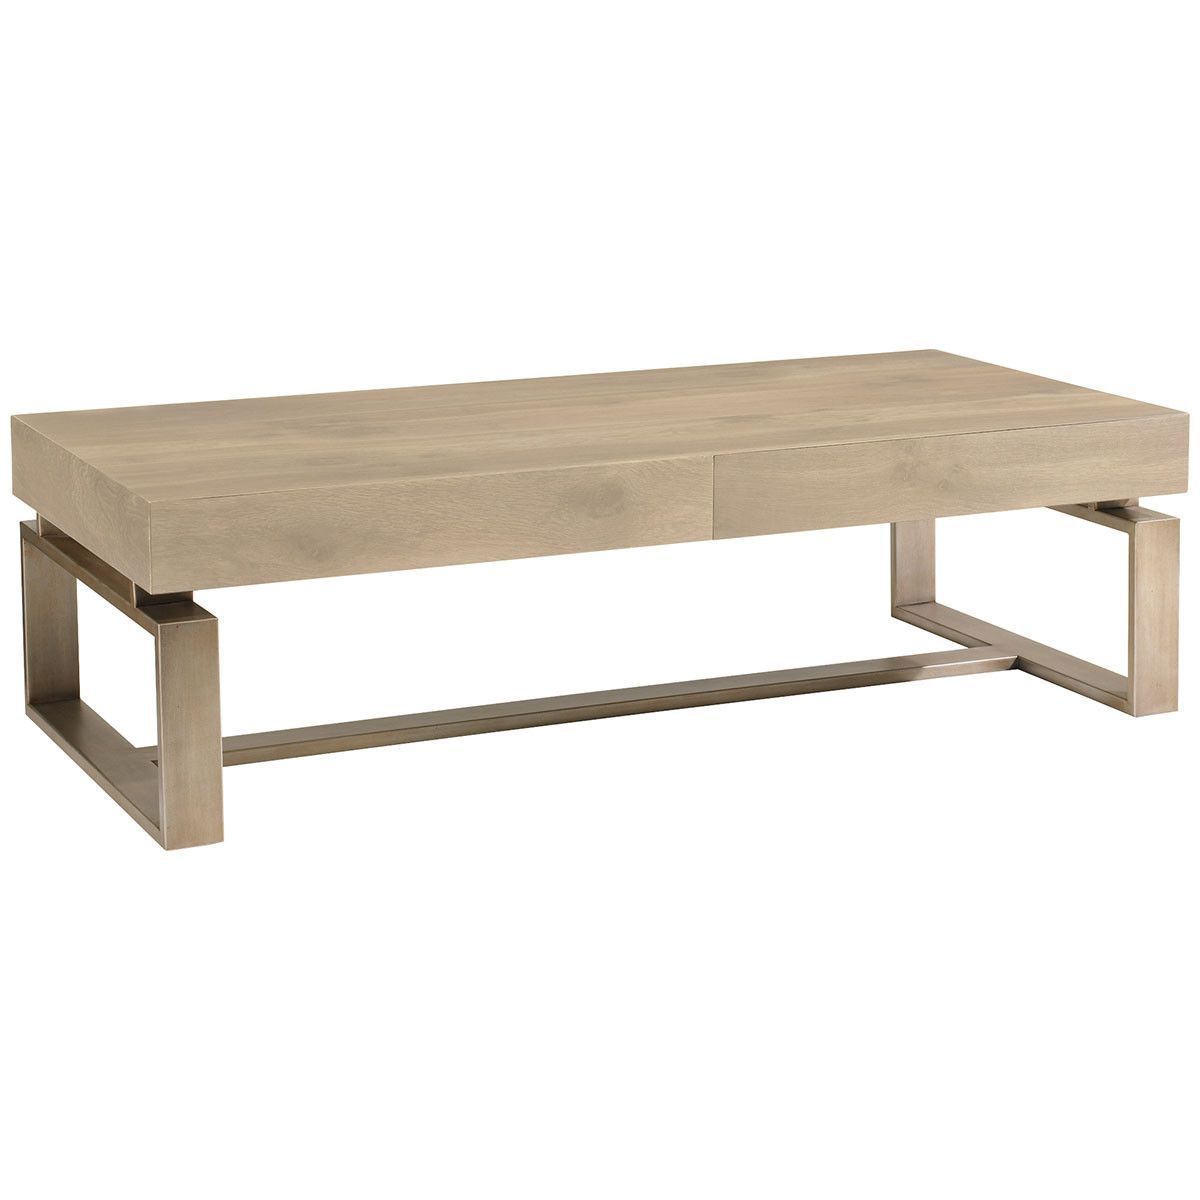 Caracole Artisans Two Drawer Cocktail Table | Sg Living 2 | Pinterest Pertaining To Parsons Travertine Top &amp; Stainless Steel Base 48x16 Console Tables (View 17 of 30)